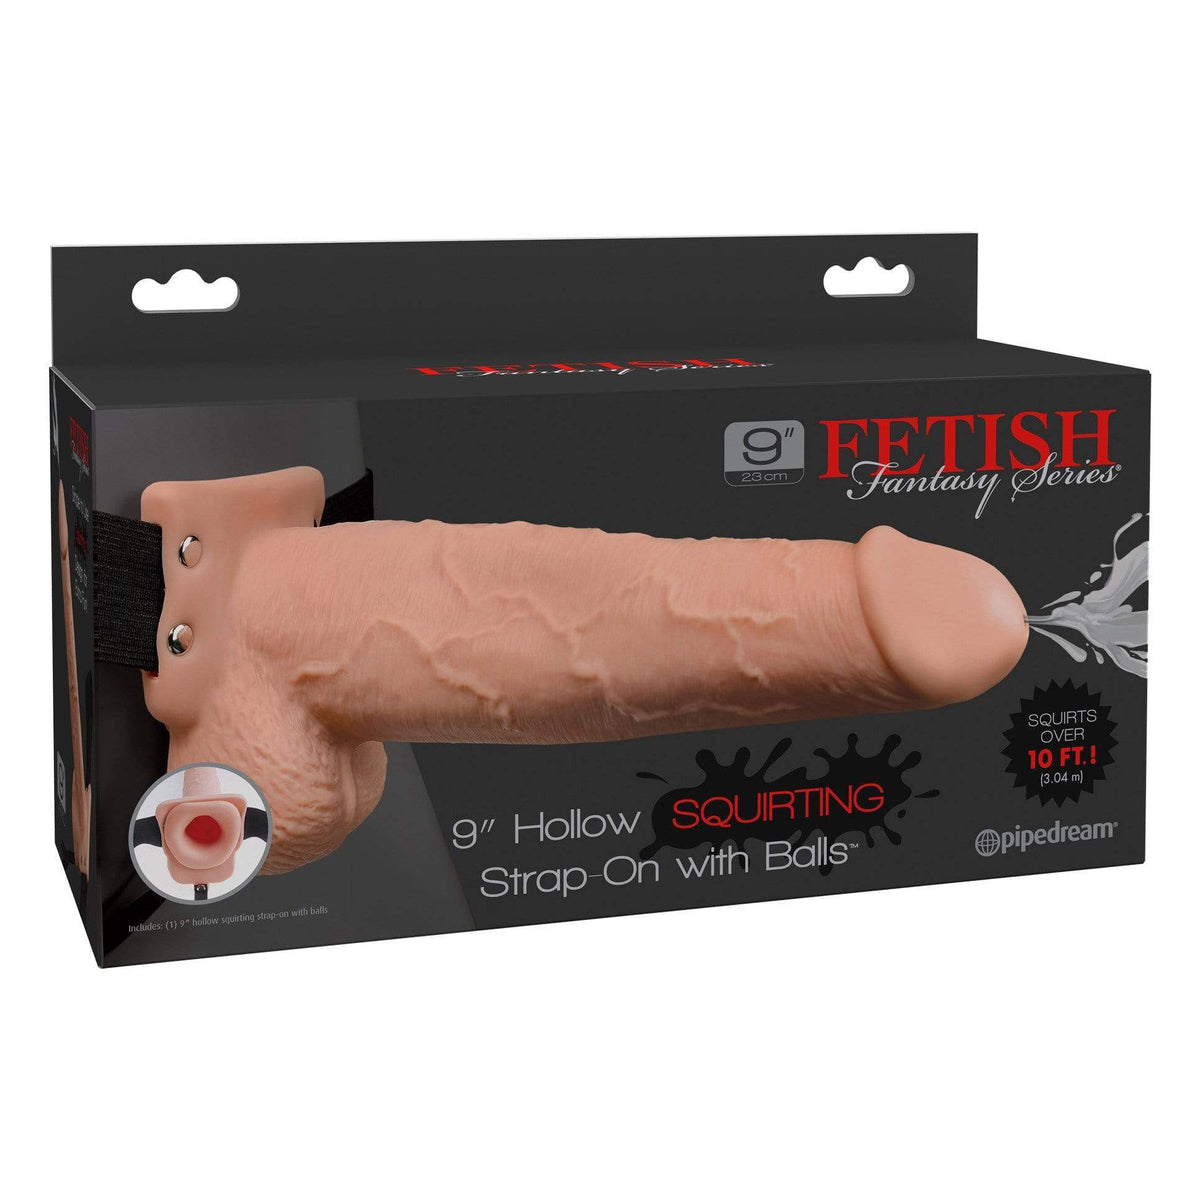 Pipedream - Fetish Fantasy Series Squirting Hollow Strap On 9&quot; (Beige) Strap On with Hollow Dildo for Male (Non Vibration) 324160434 CherryAffairs